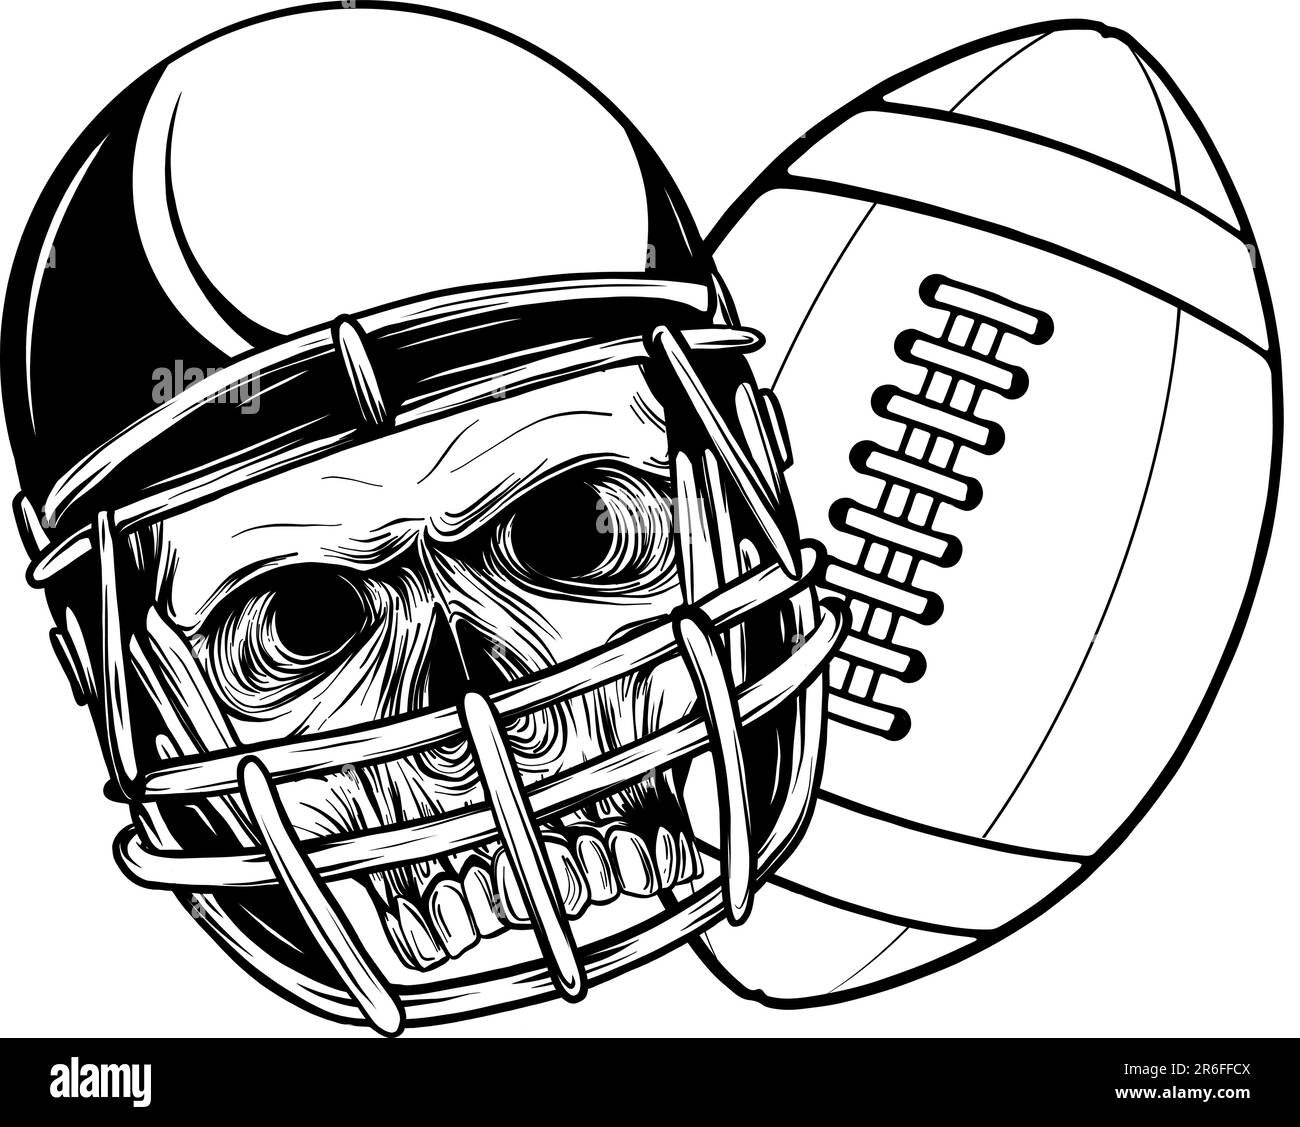 Monochrome rugby skull with ball in vector illustration design Stock Vector